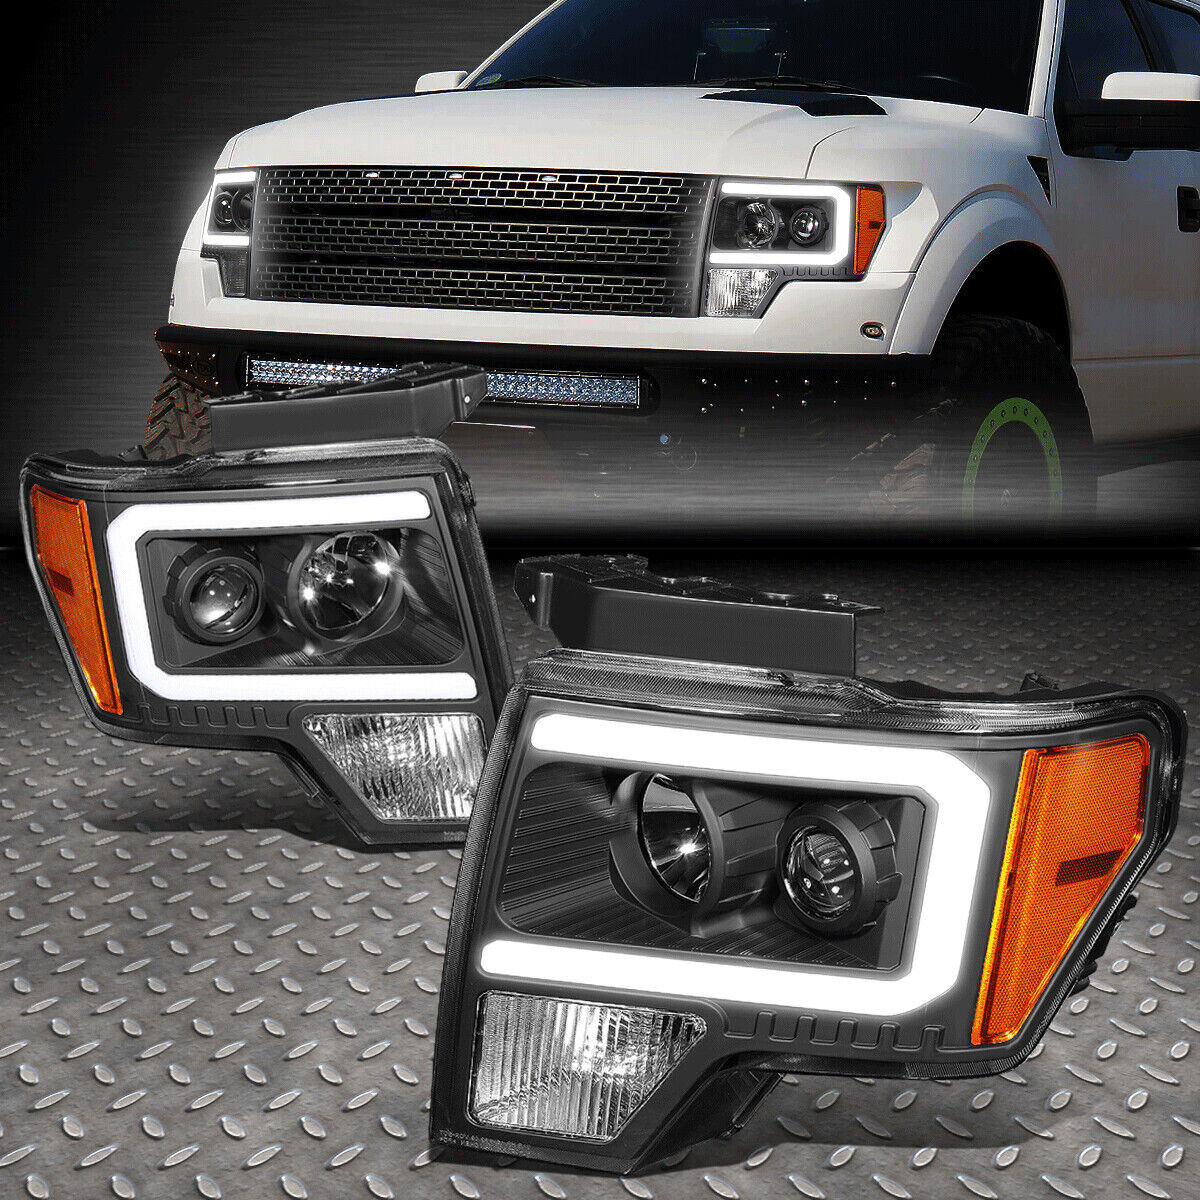 [LED DRL] FOR 09-14 FORD F150 F-150 BLACK AMBER PROJECTOR HEADLIGHT HEAD LAMPS